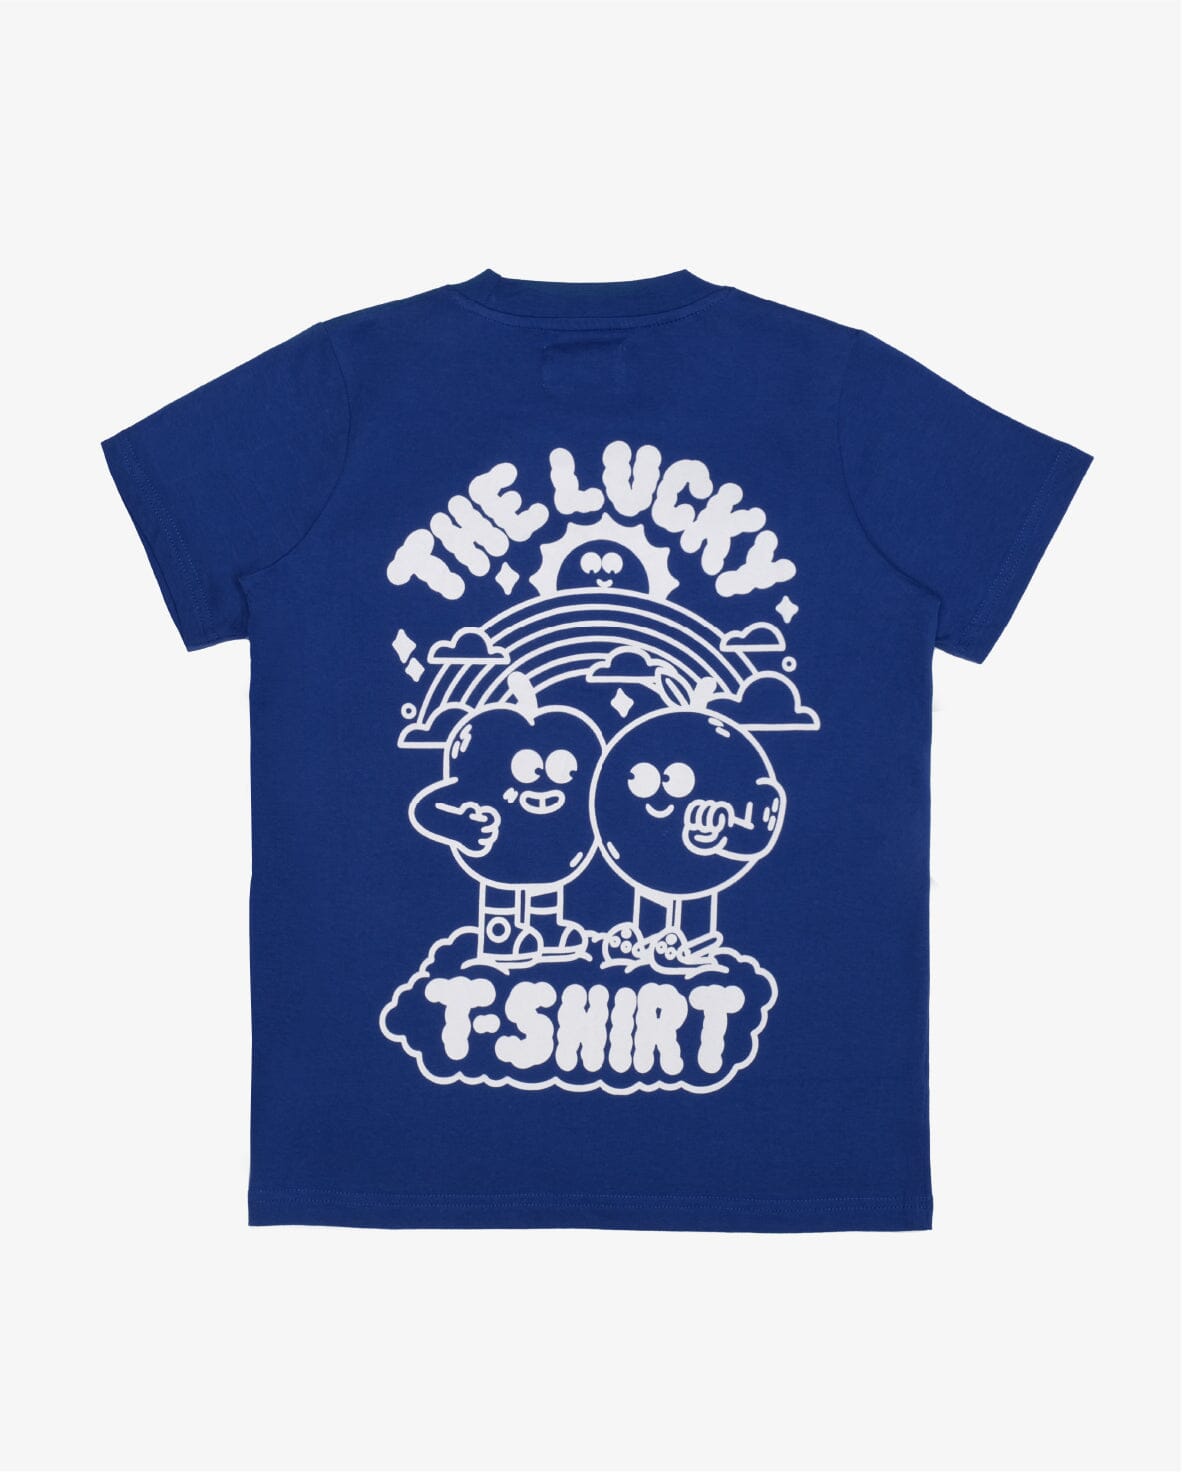 BAND OF BOYS | The Lucky T-Shirt Tee - Ink Blue Boys Band of Boys